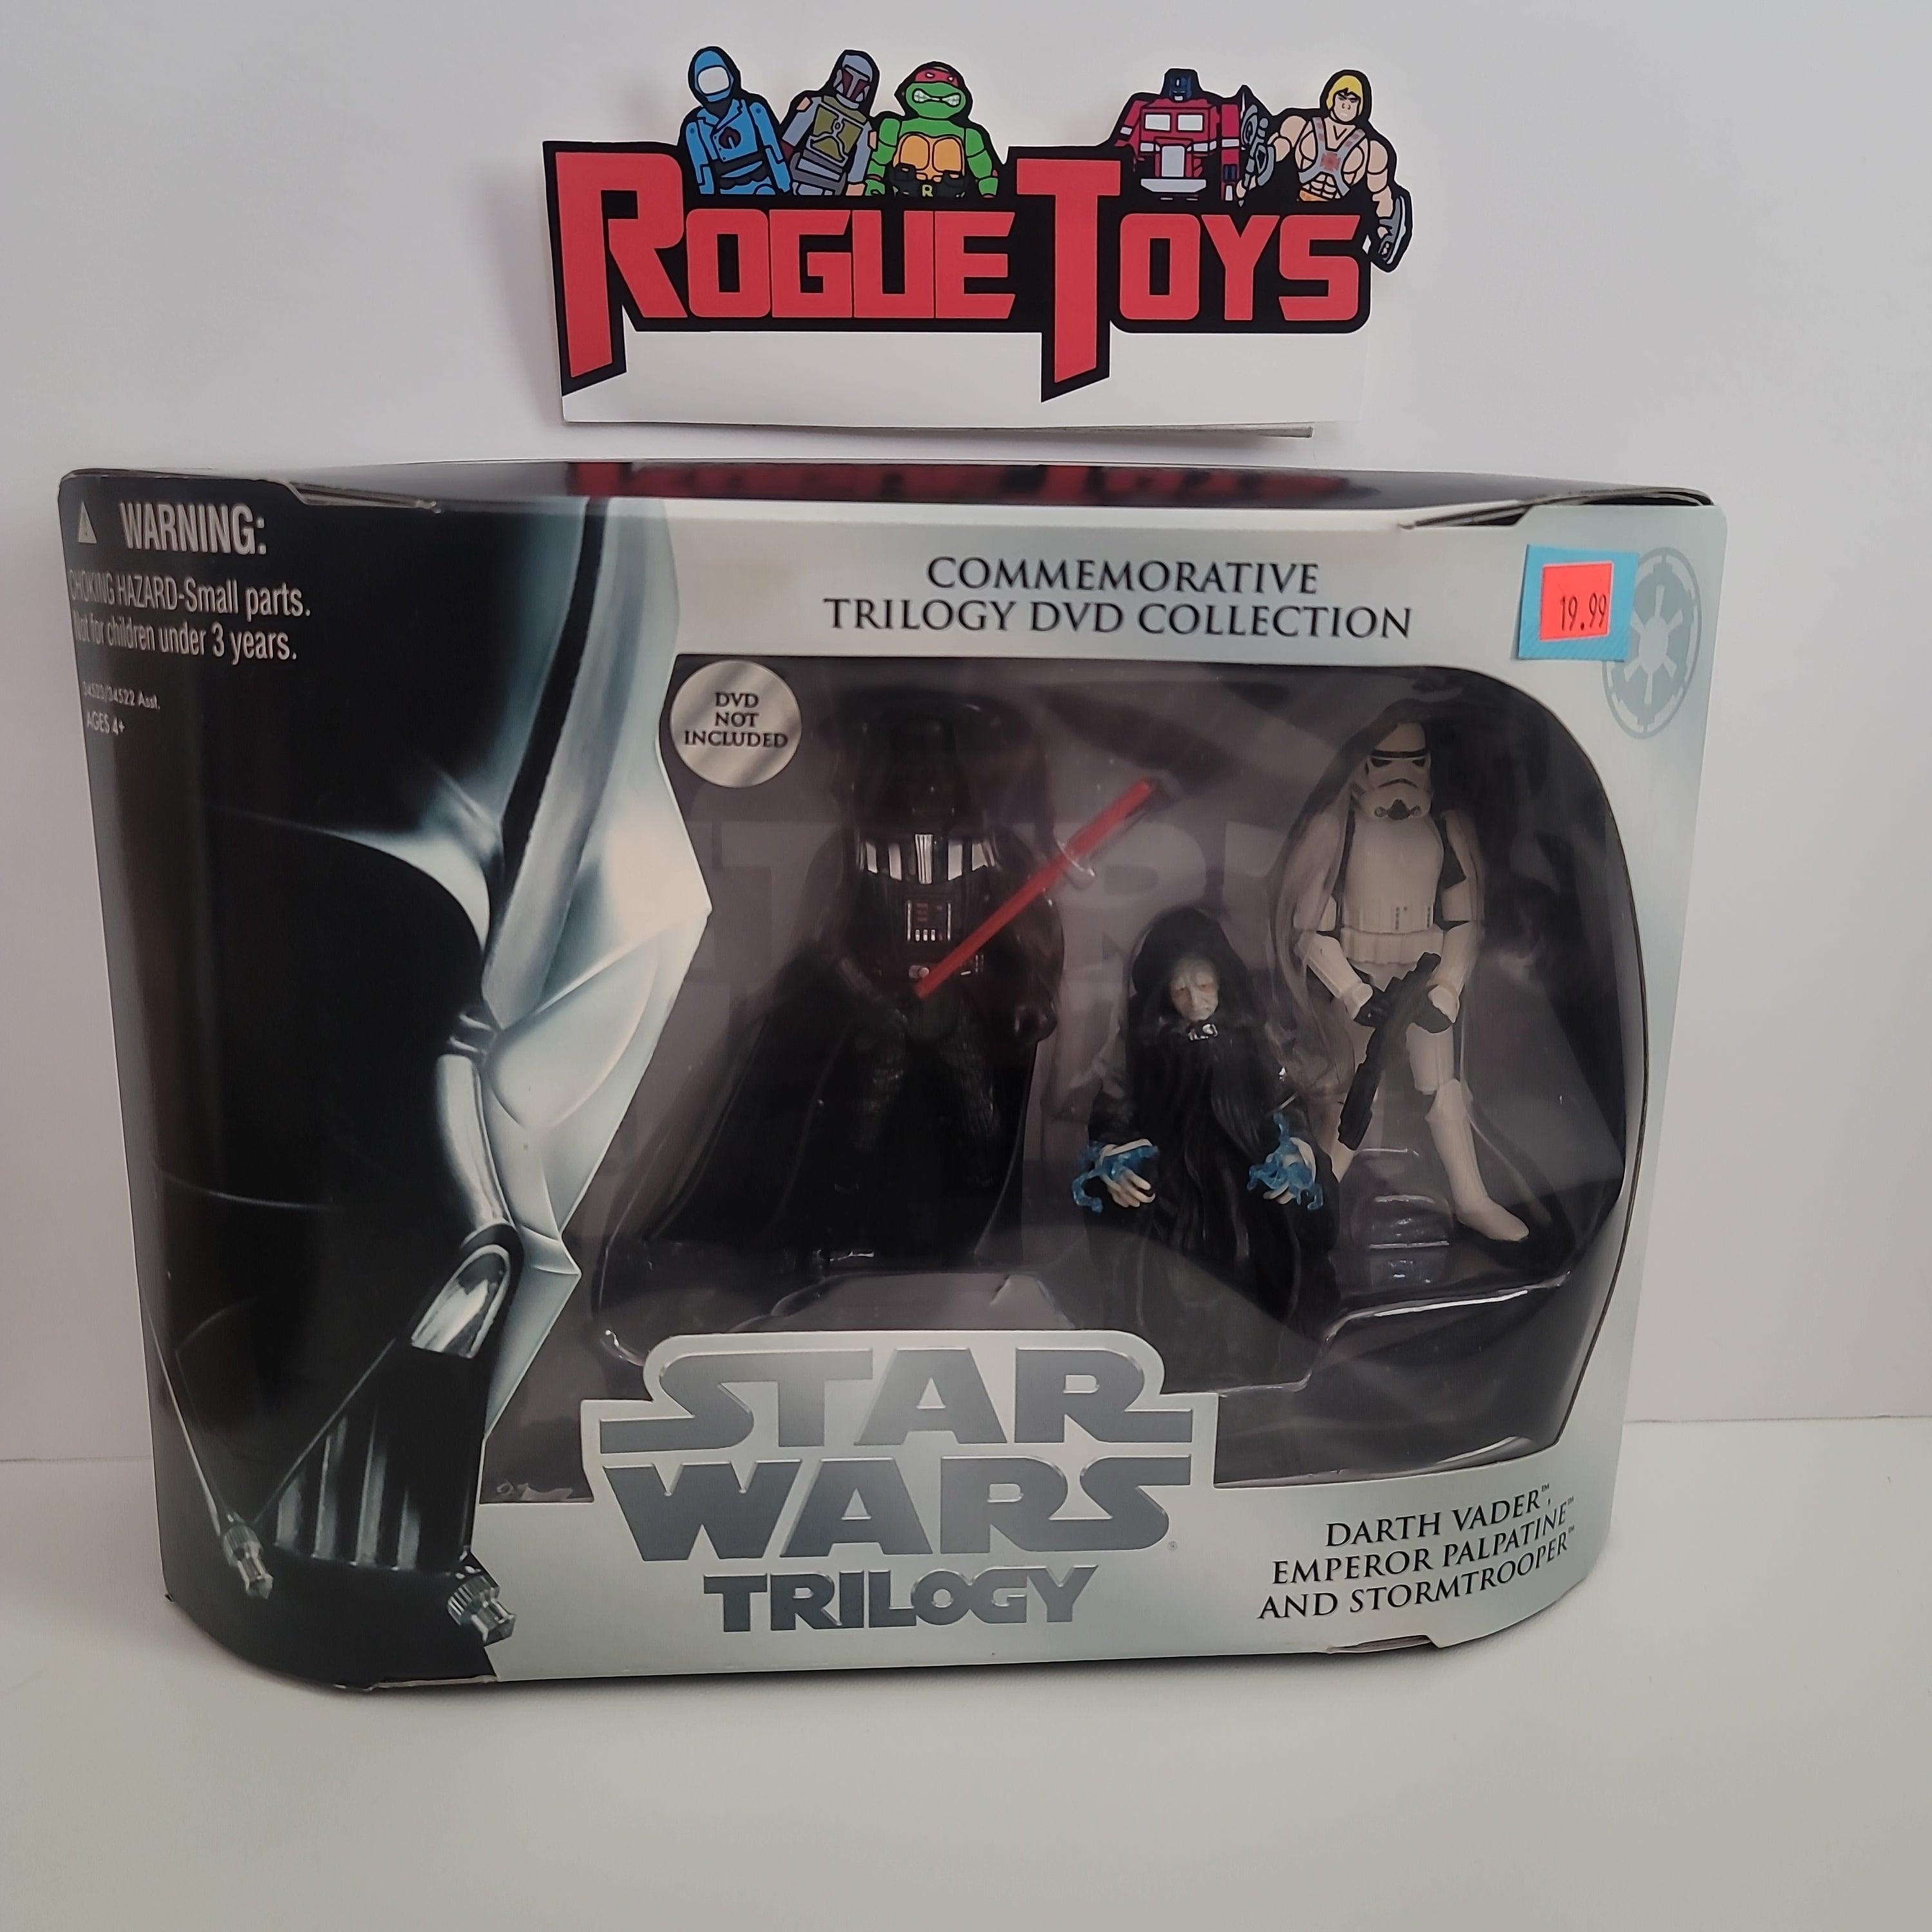 Hasbro Star Wars Trilogy Commemorative DVD collection Darth Vader emperor palpatine and stormtrooper - Rogue Toys